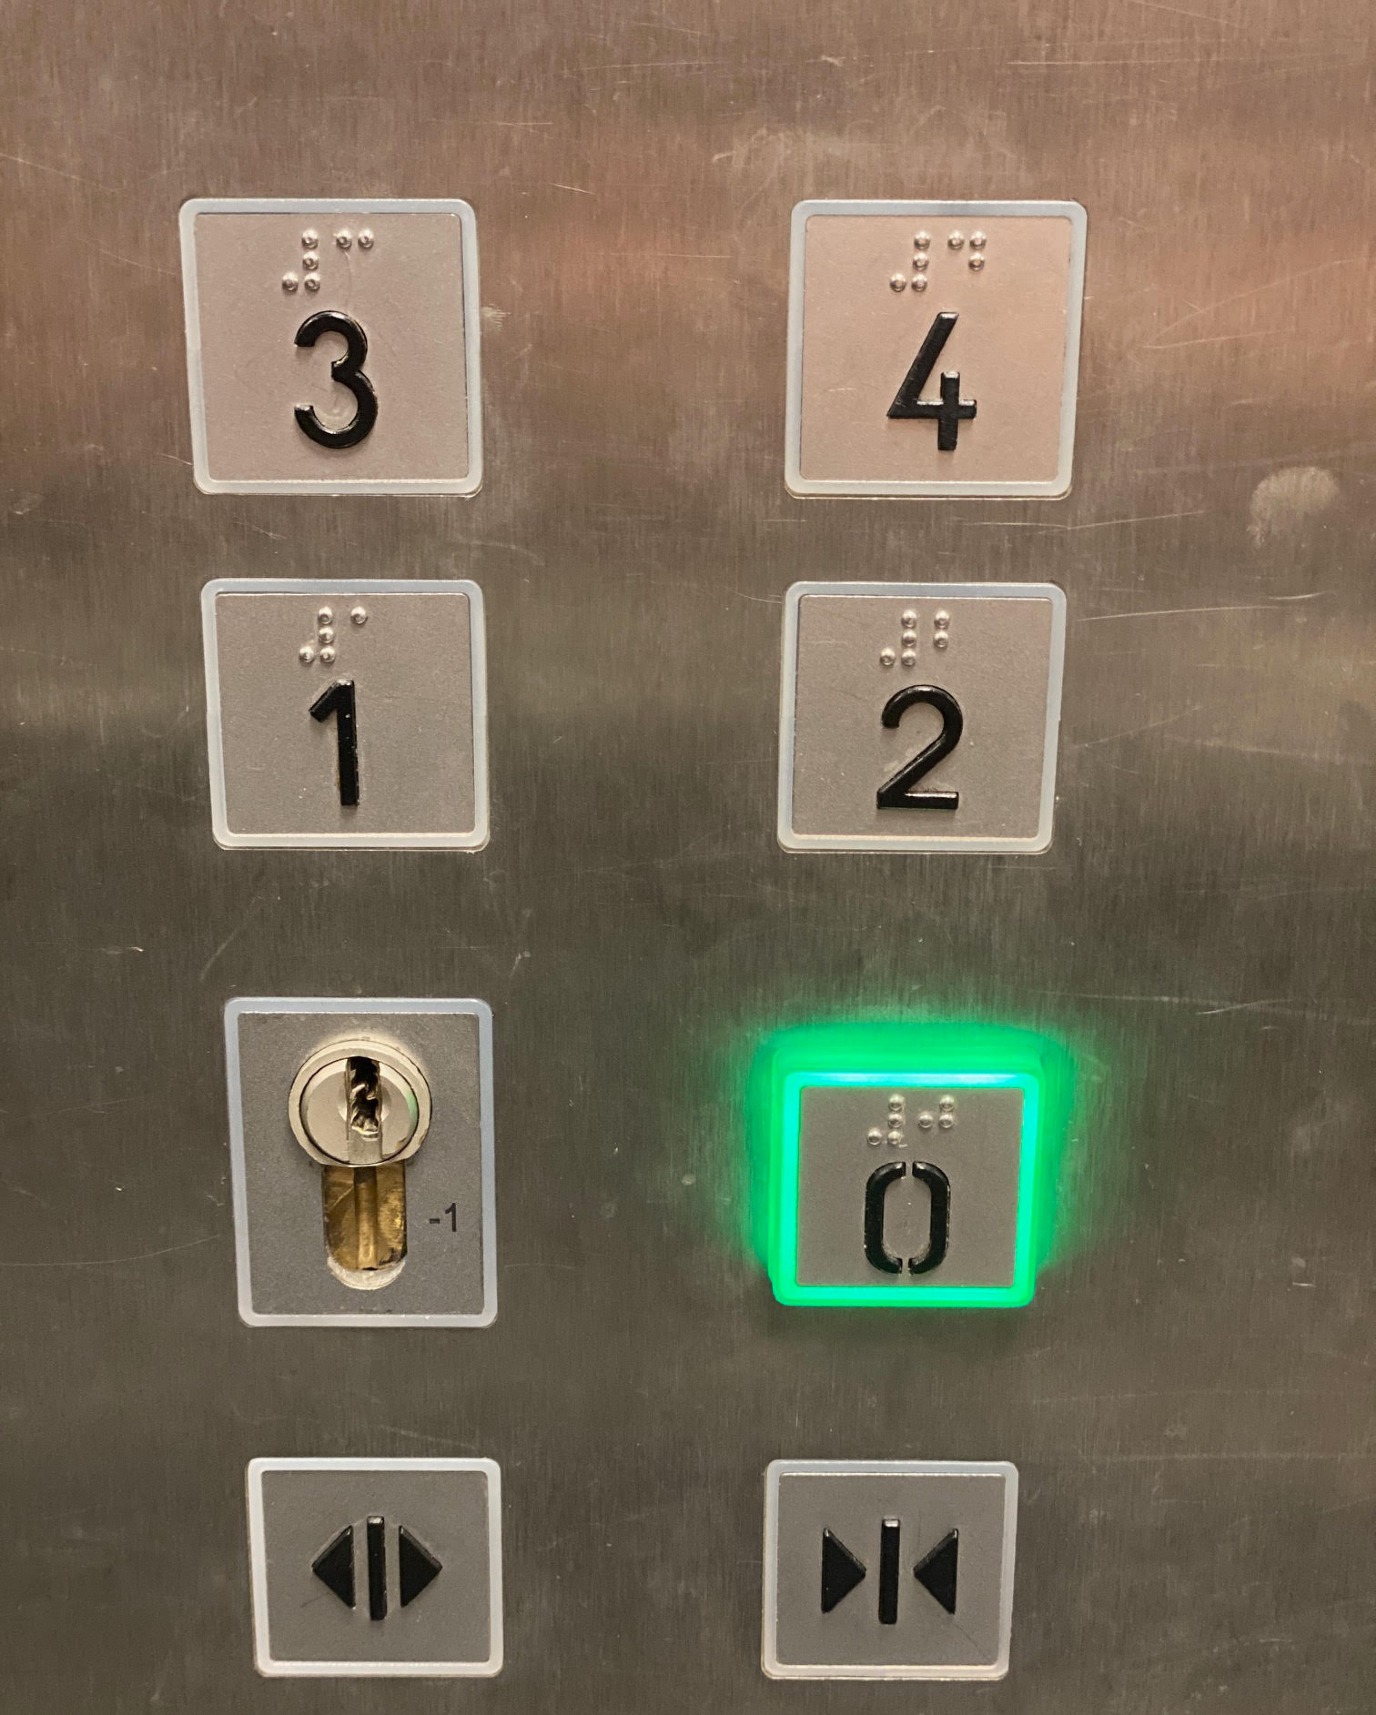 Next to the control buttons in the lifts, the floor is indicated in Braille.